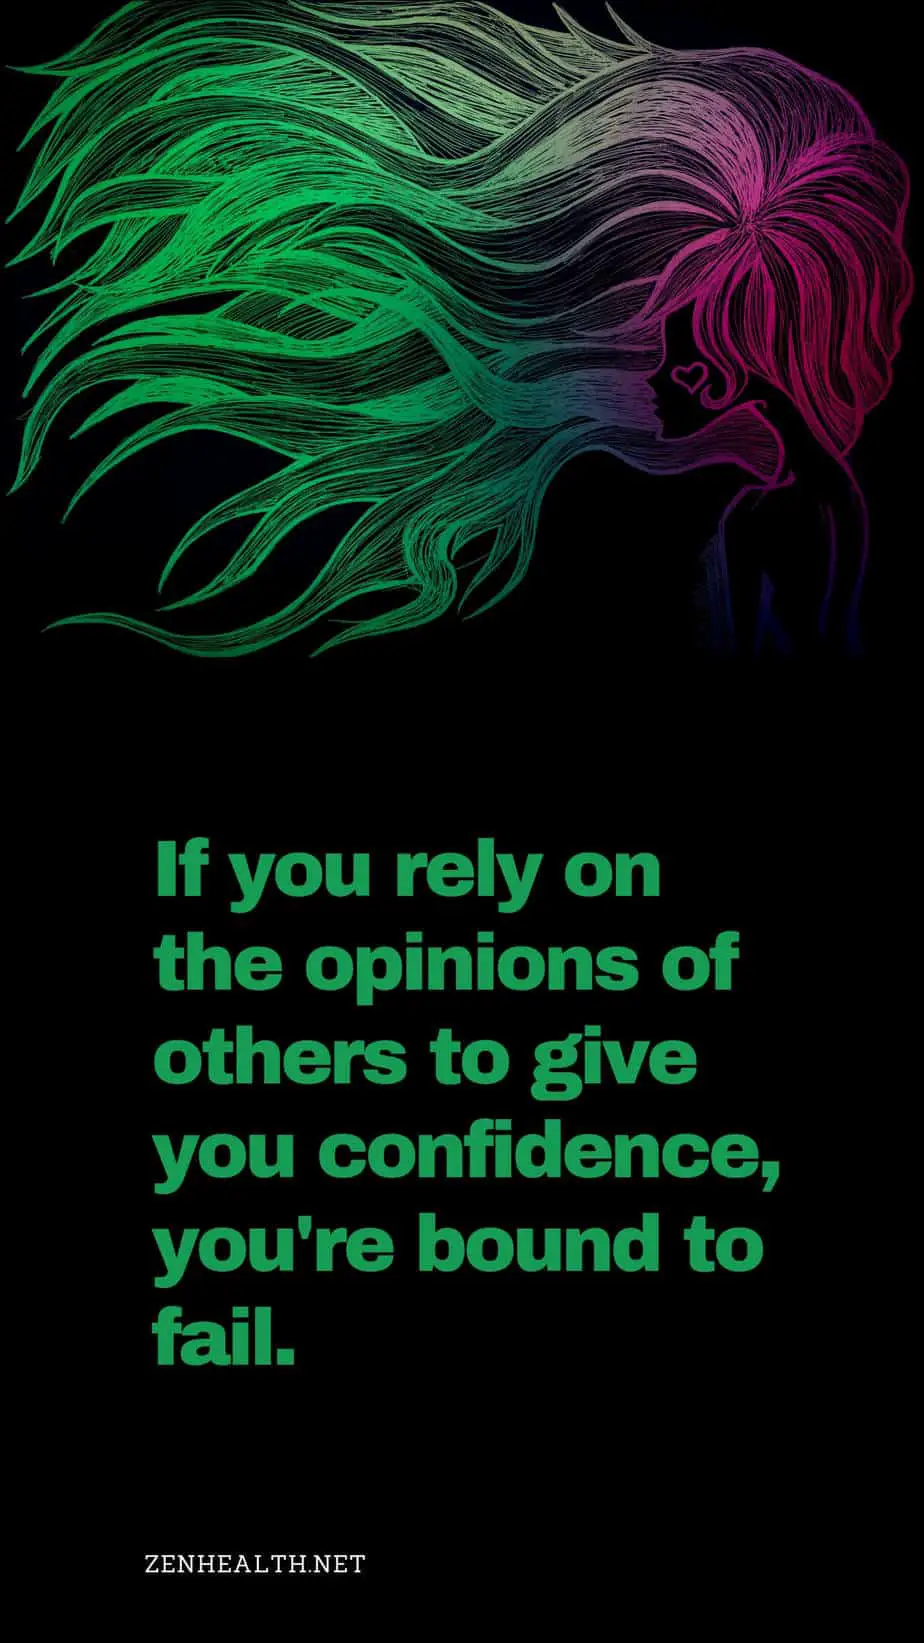 If you rely on the opinions of others to give you confidence, you're bound to fail.